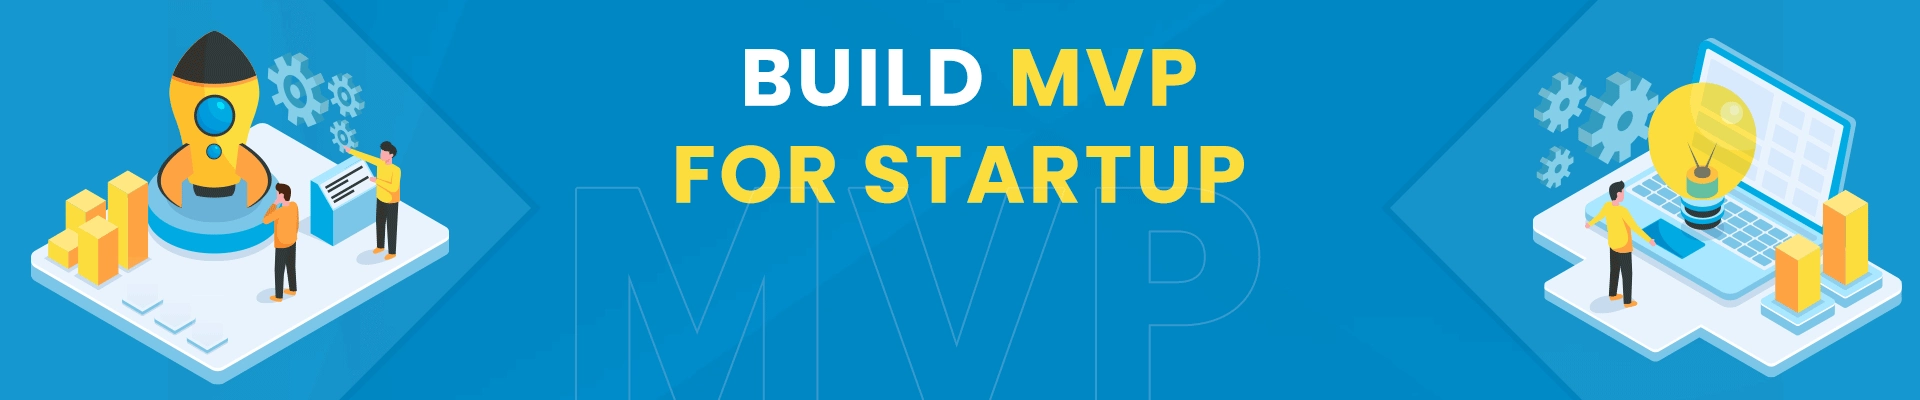 Minimum Viable Product (MVP) for Startup